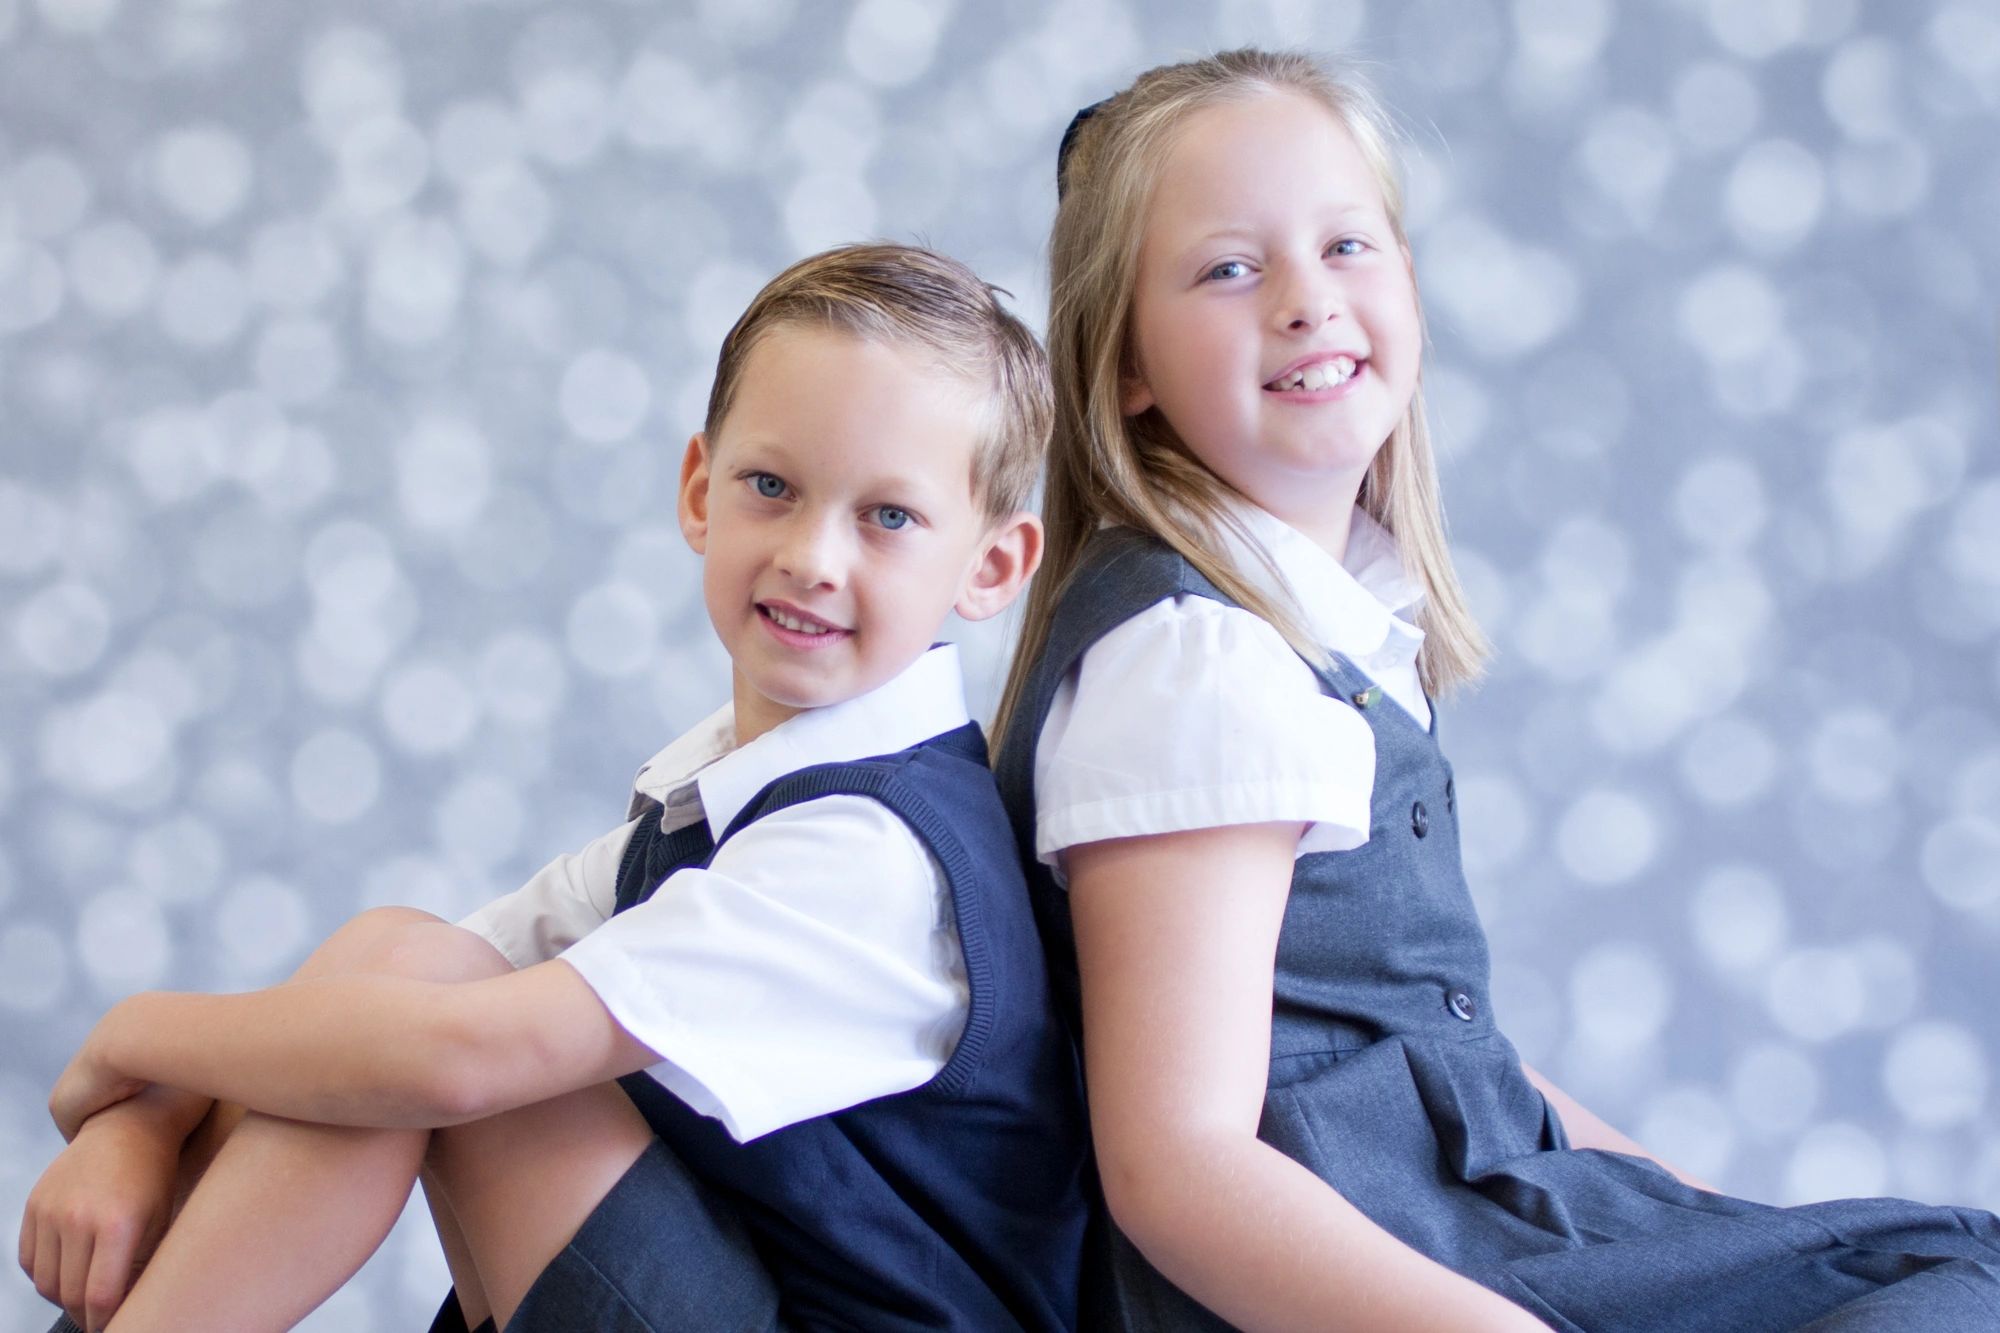 Fun, bright, happy school portraits bringing out your child's personality!